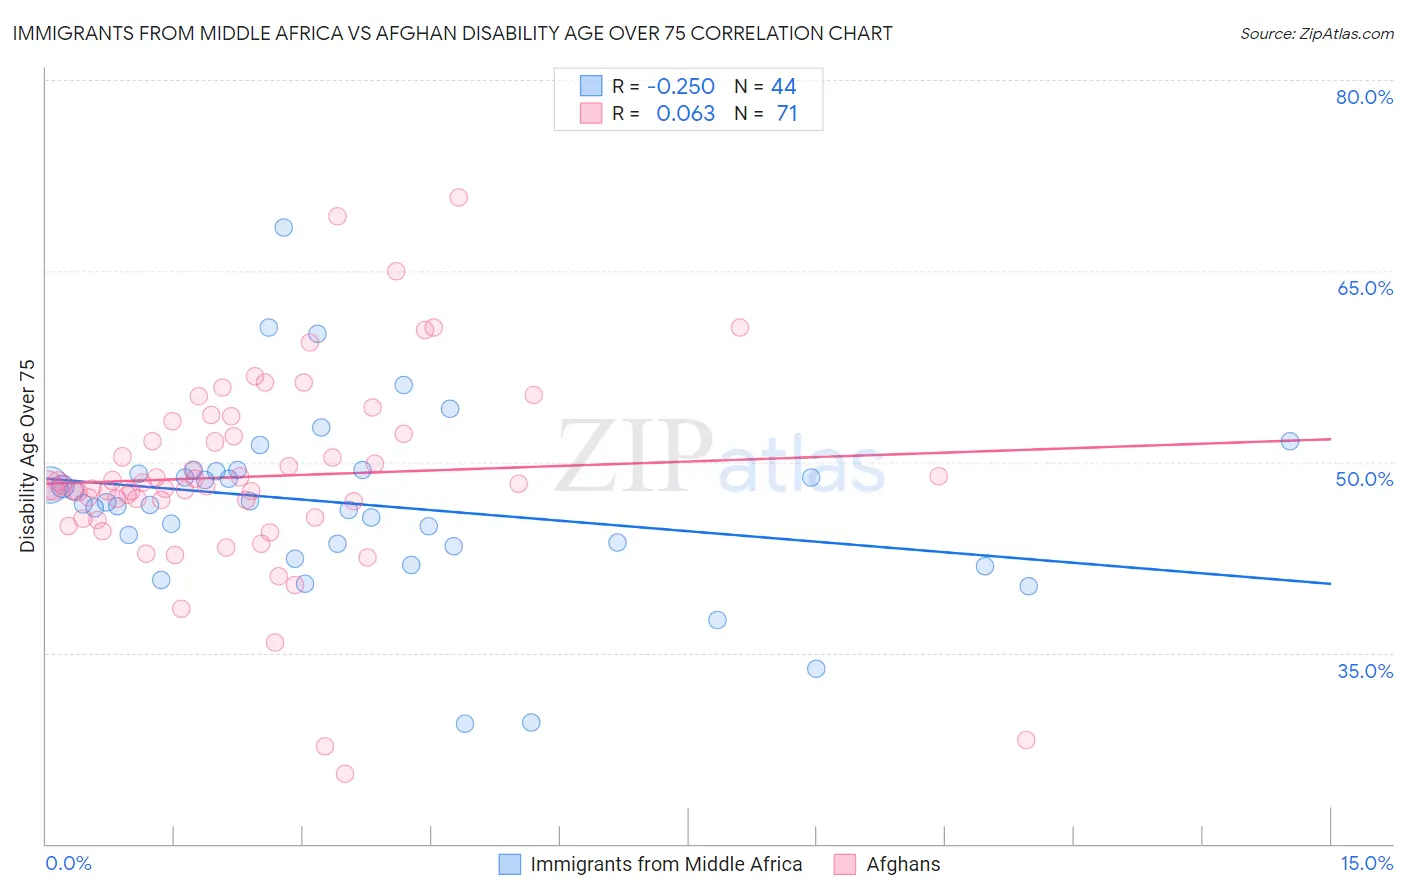 Immigrants from Middle Africa vs Afghan Disability Age Over 75